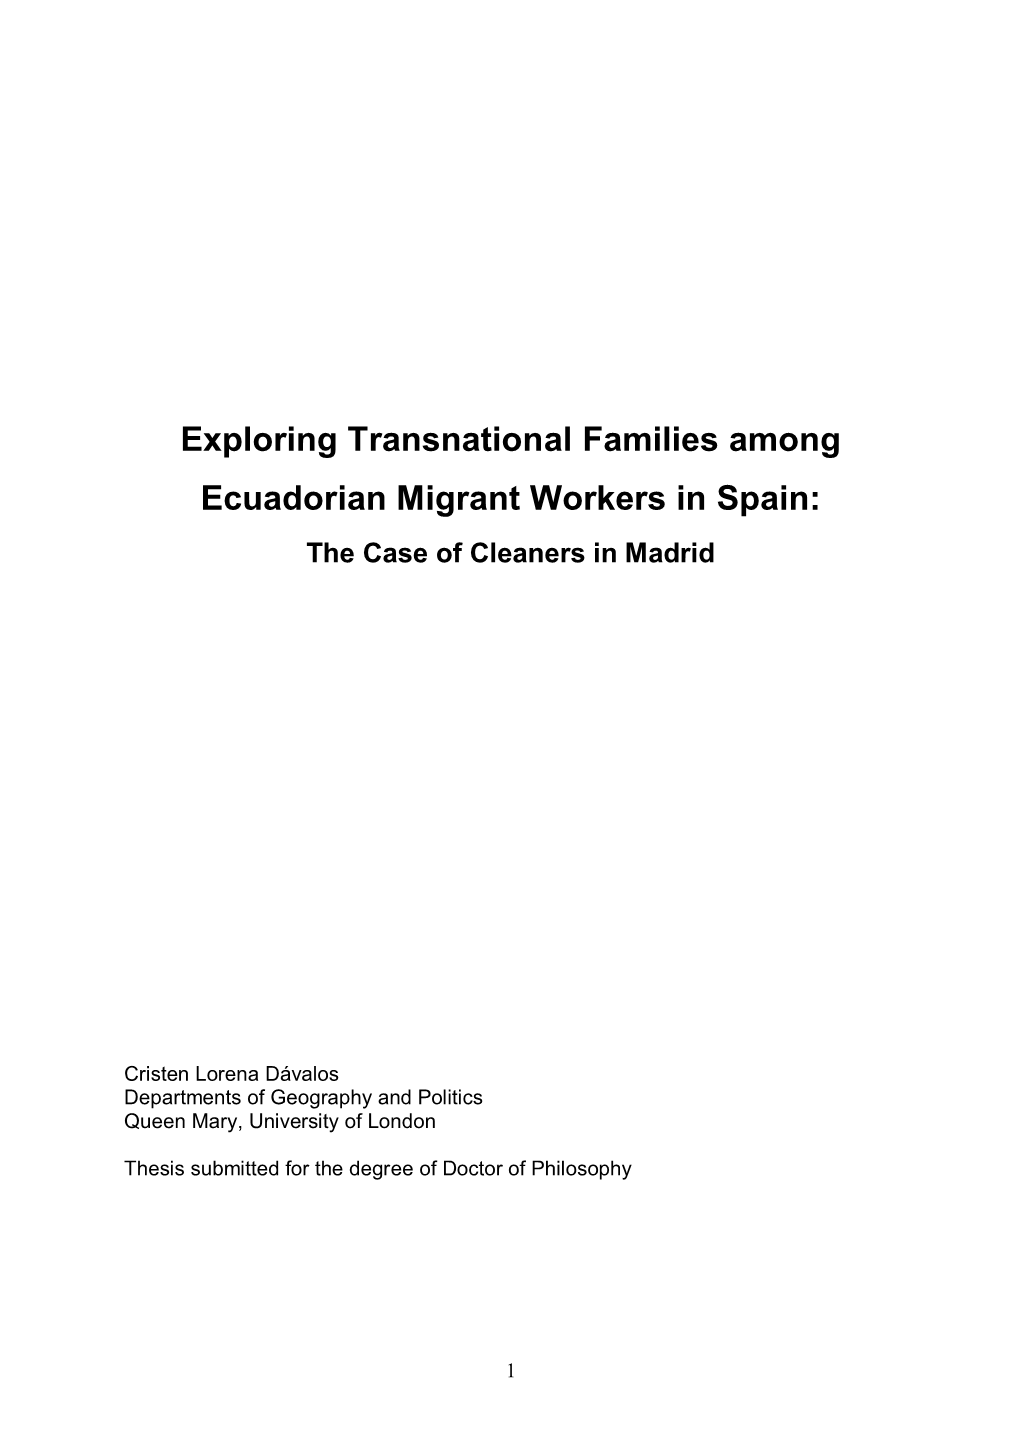 Ecuadorian Migrant Workers in Spain: the Case of Cleaners in Madrid